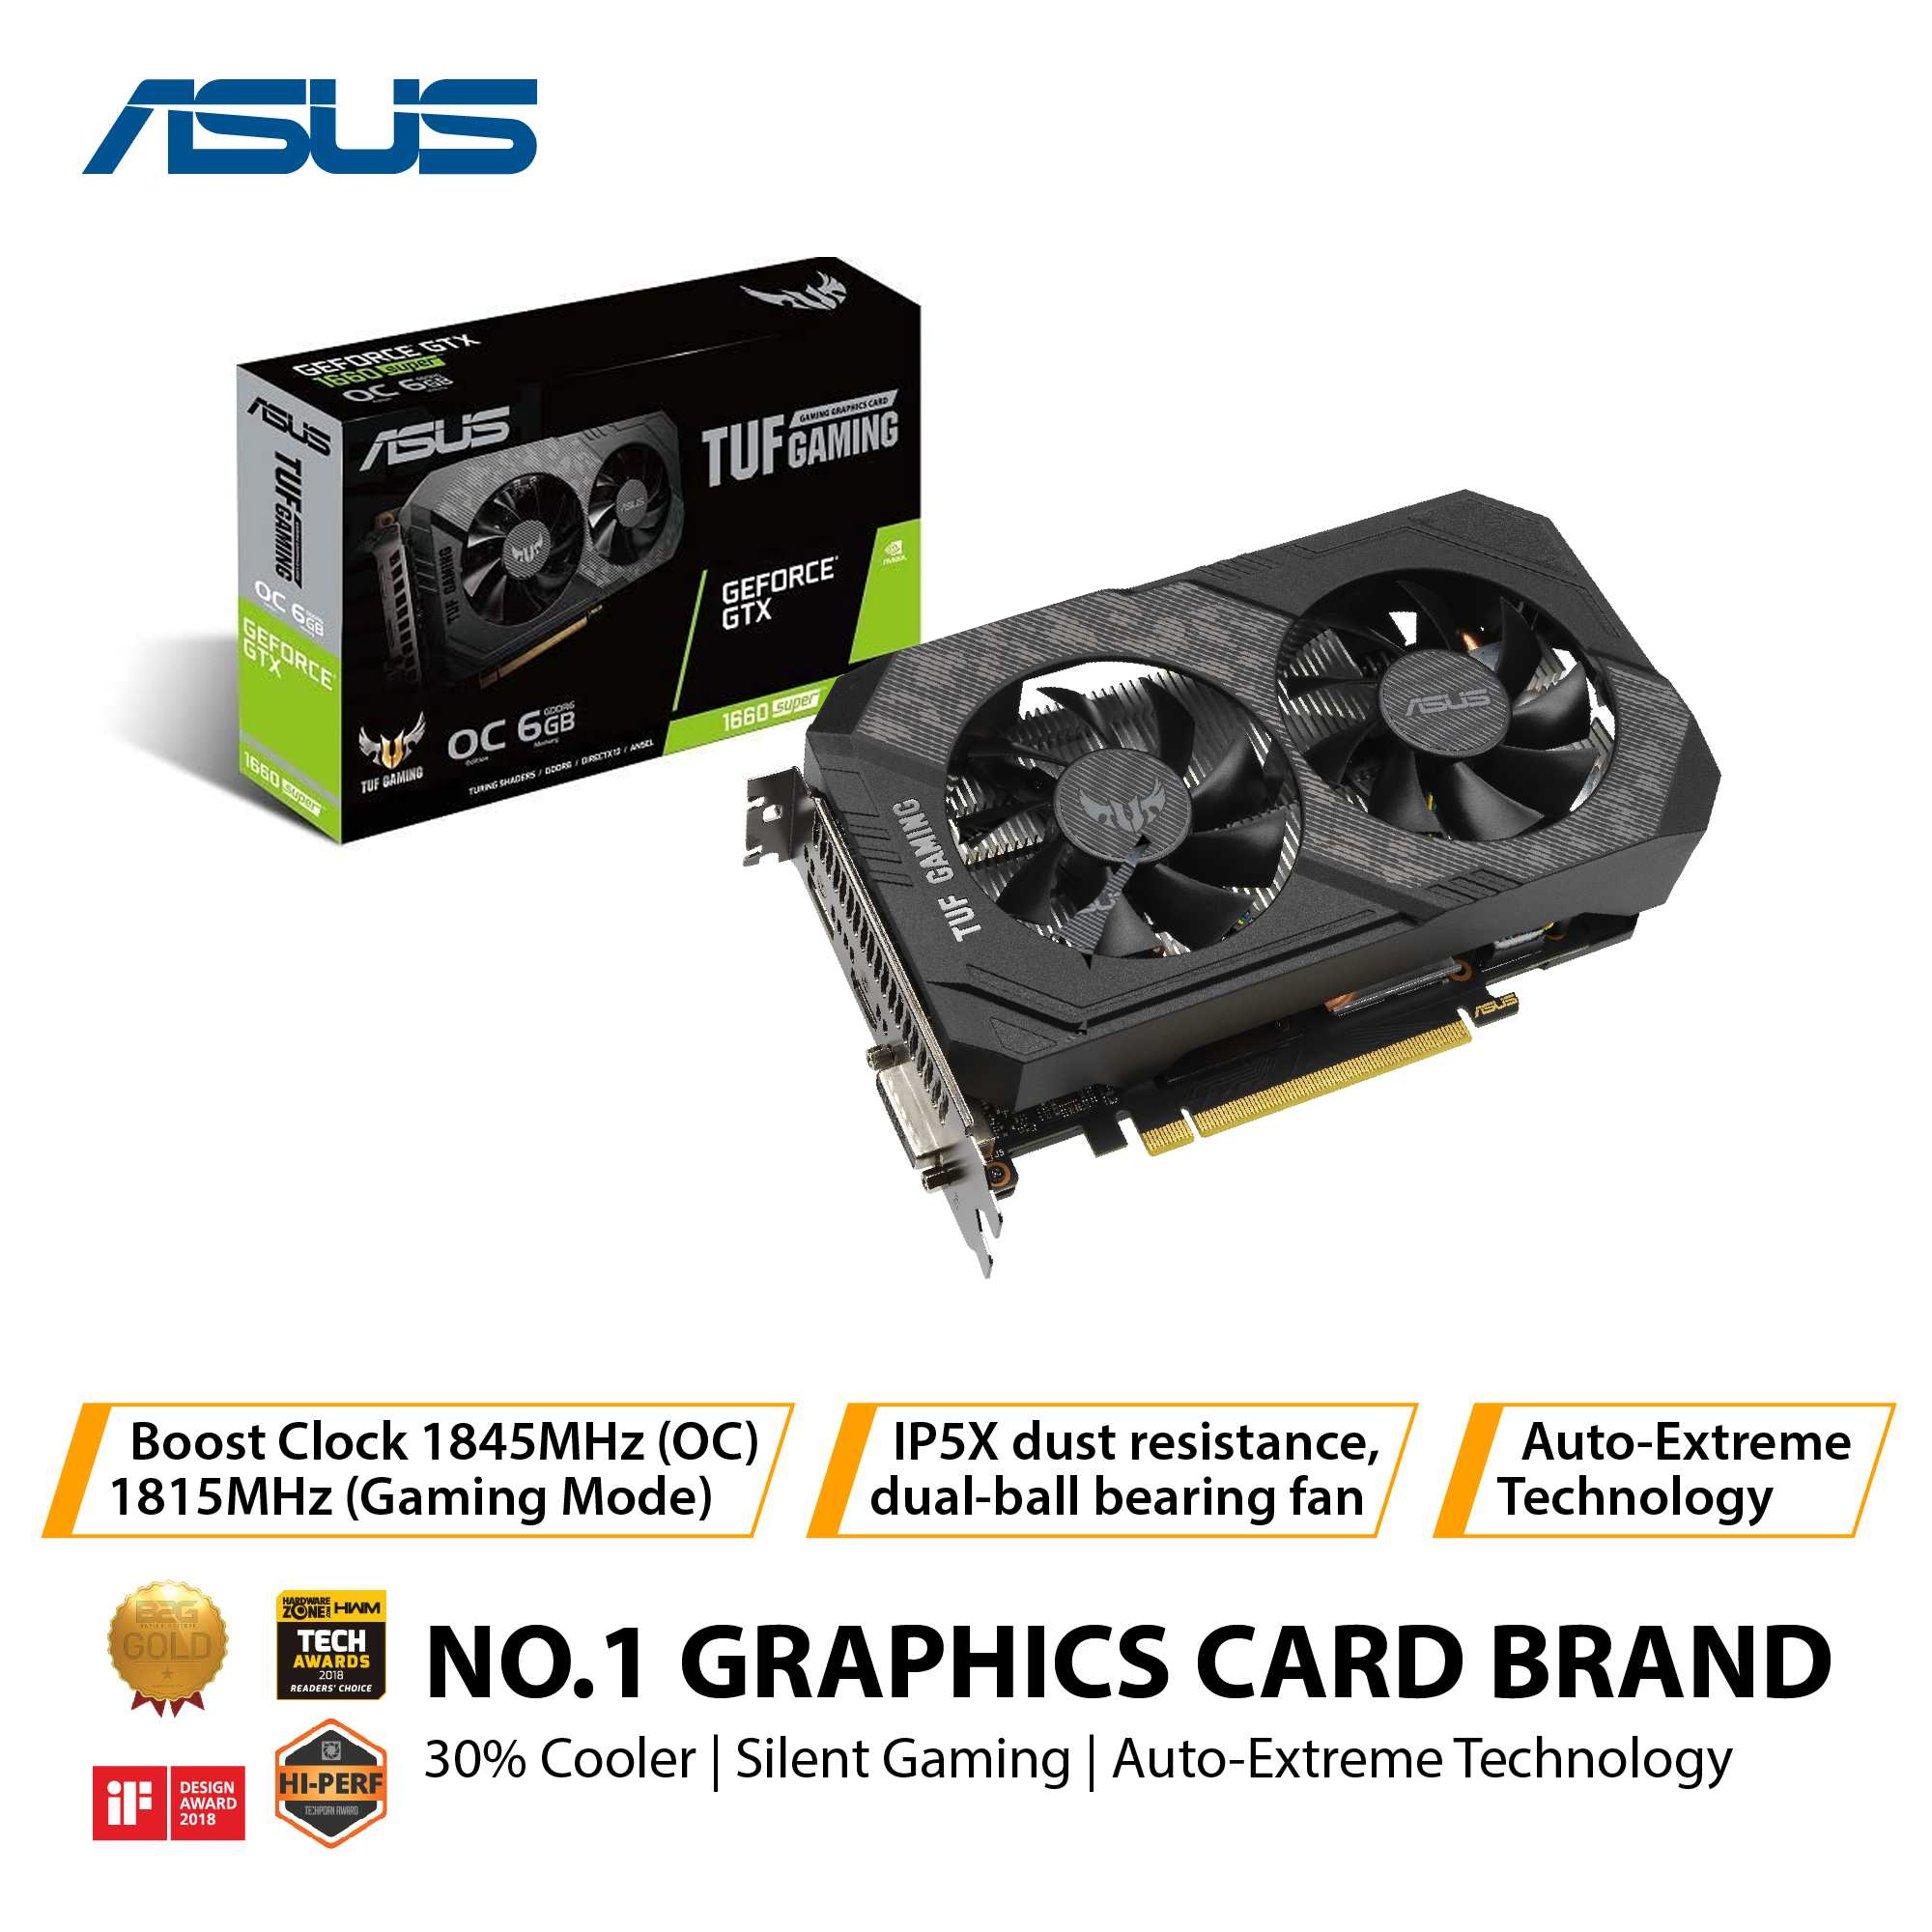 SALE!!! Asus TUF Gaming GeForce GTX 1660 Super OC Edition 6GB GDDR6 Gaming  Graphic Card (TUF-GTX1660S-O6G-GAMING) rocks high refresh rates without  breaking a sweat Lazada PH